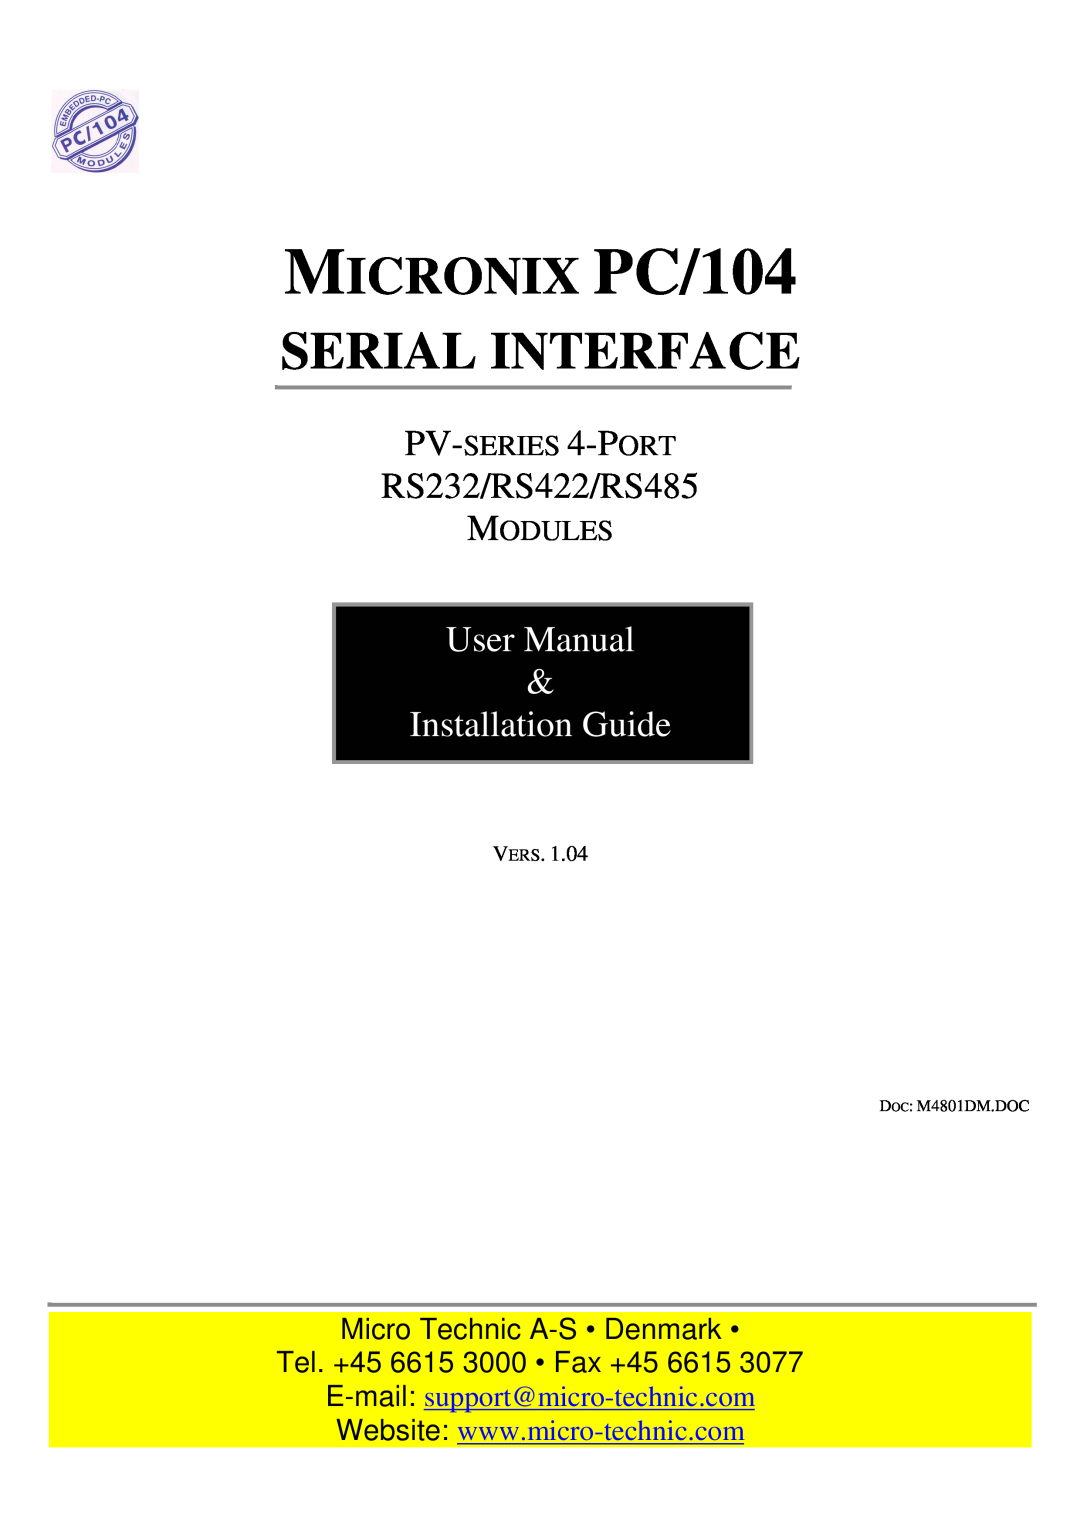 Micro Technic user manual Vers, MICRONIX PC/104 SERIAL INTERFACE, RS232/RS422/RS485, User Manual, Installation Guide 